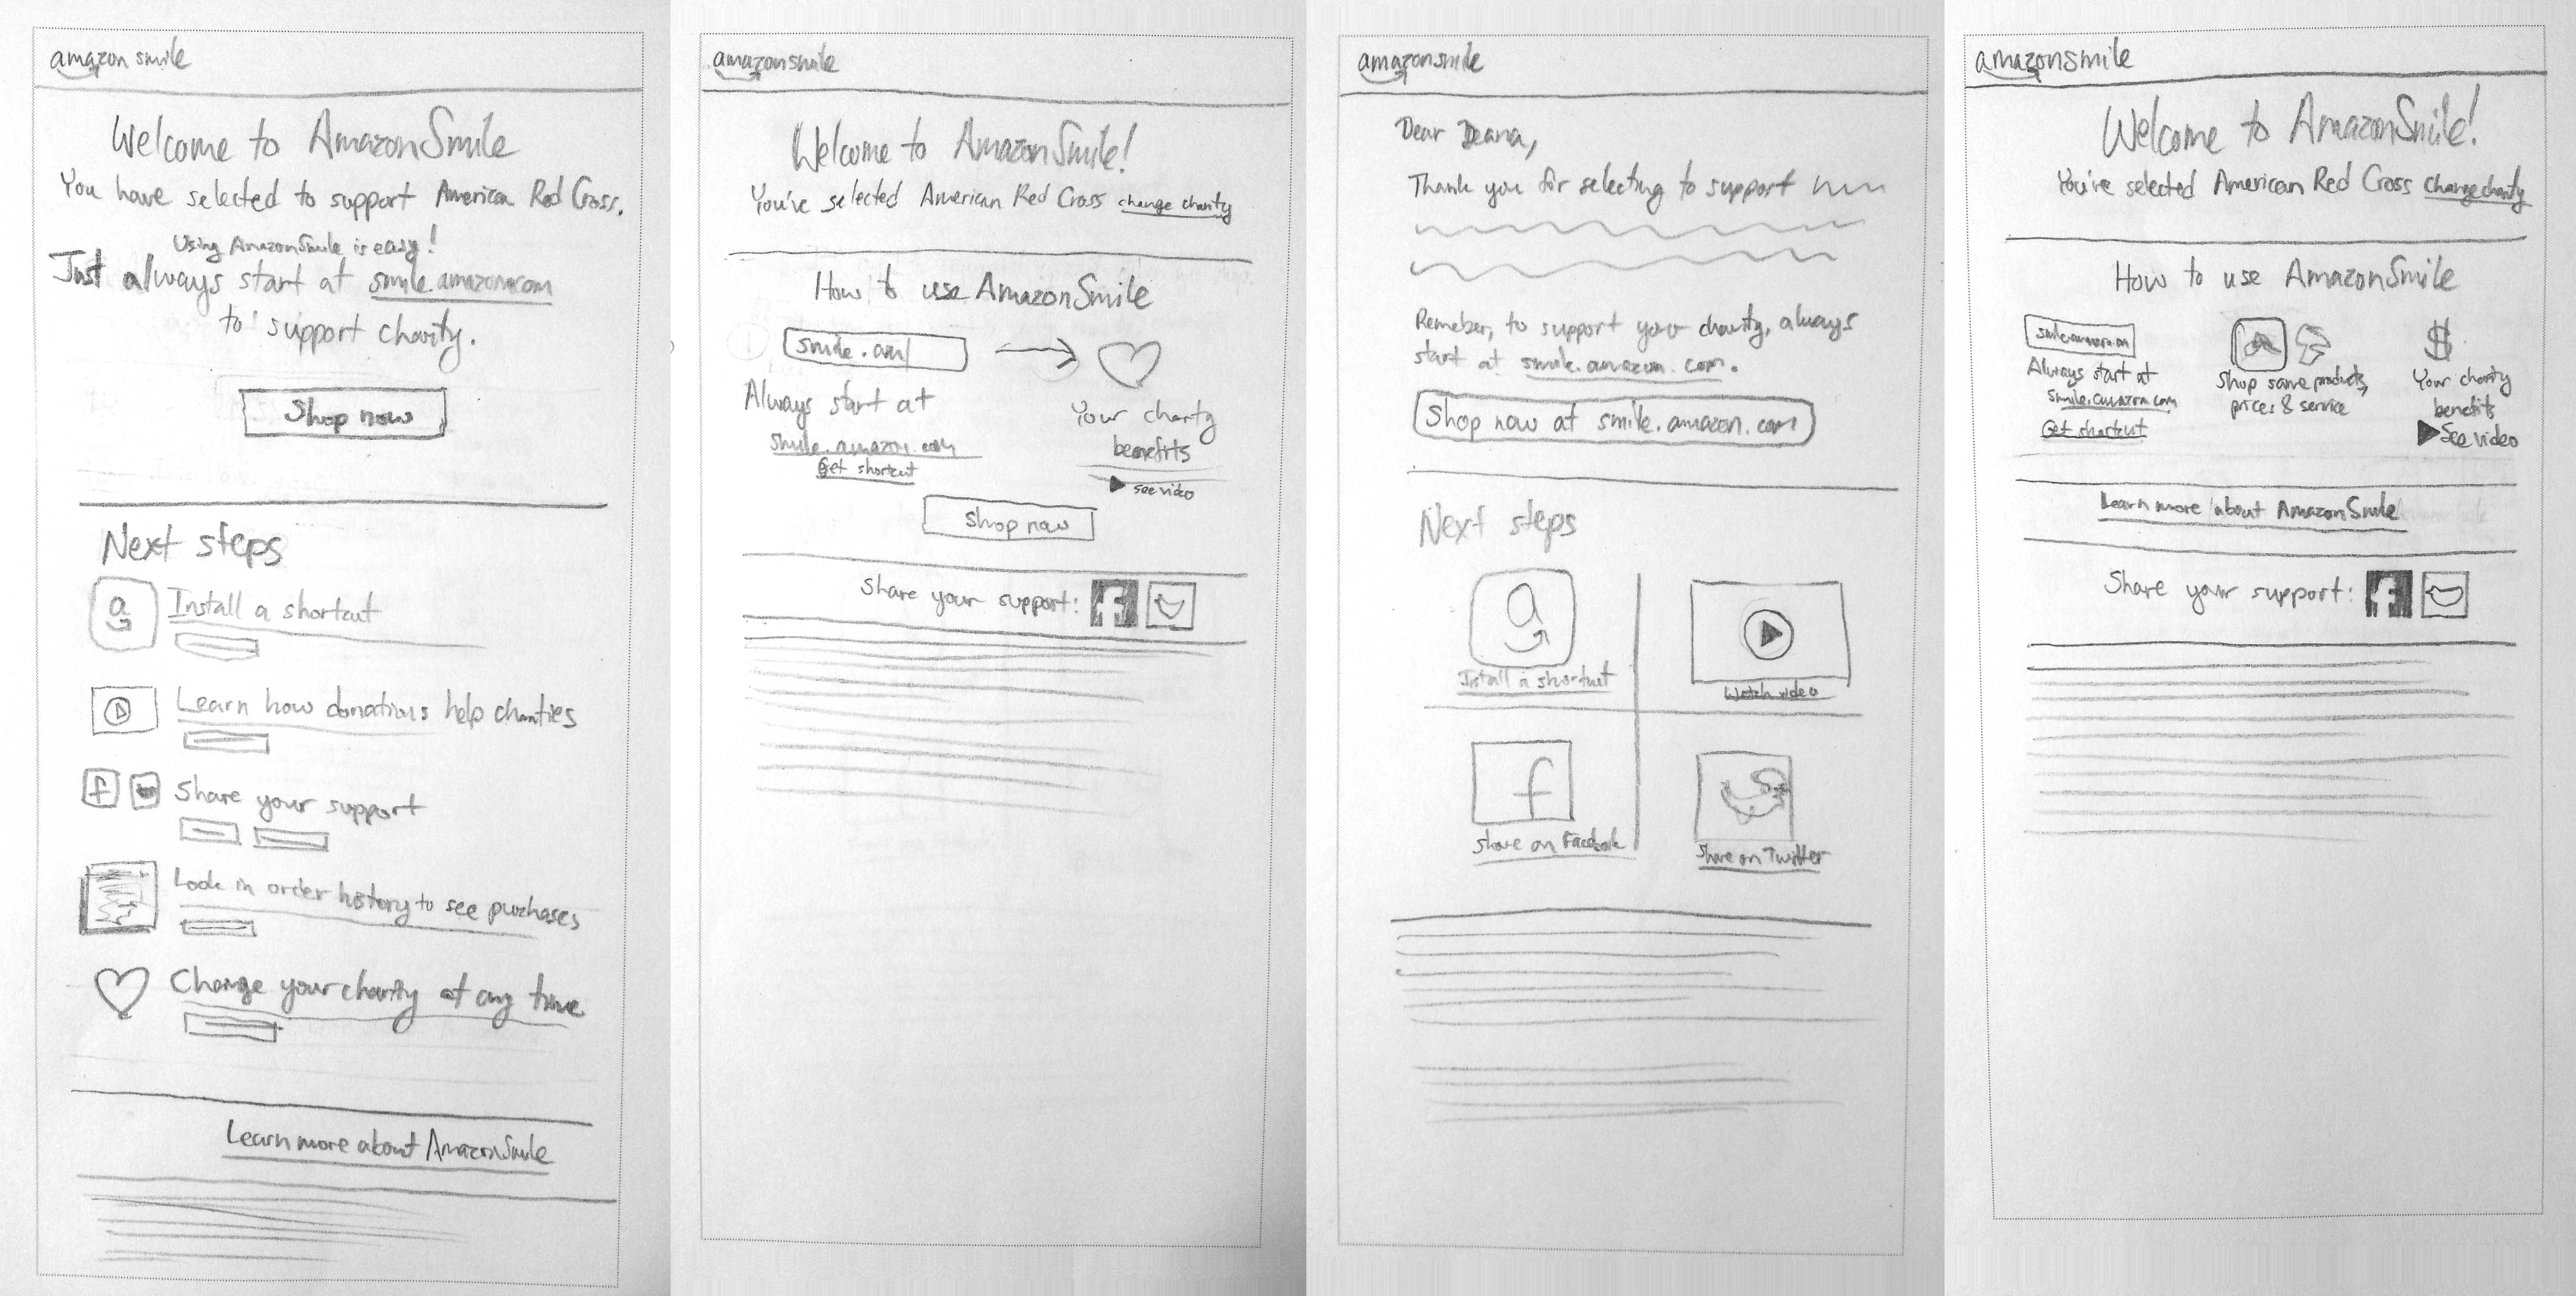 Pencil sketches showing more iterations of layouts